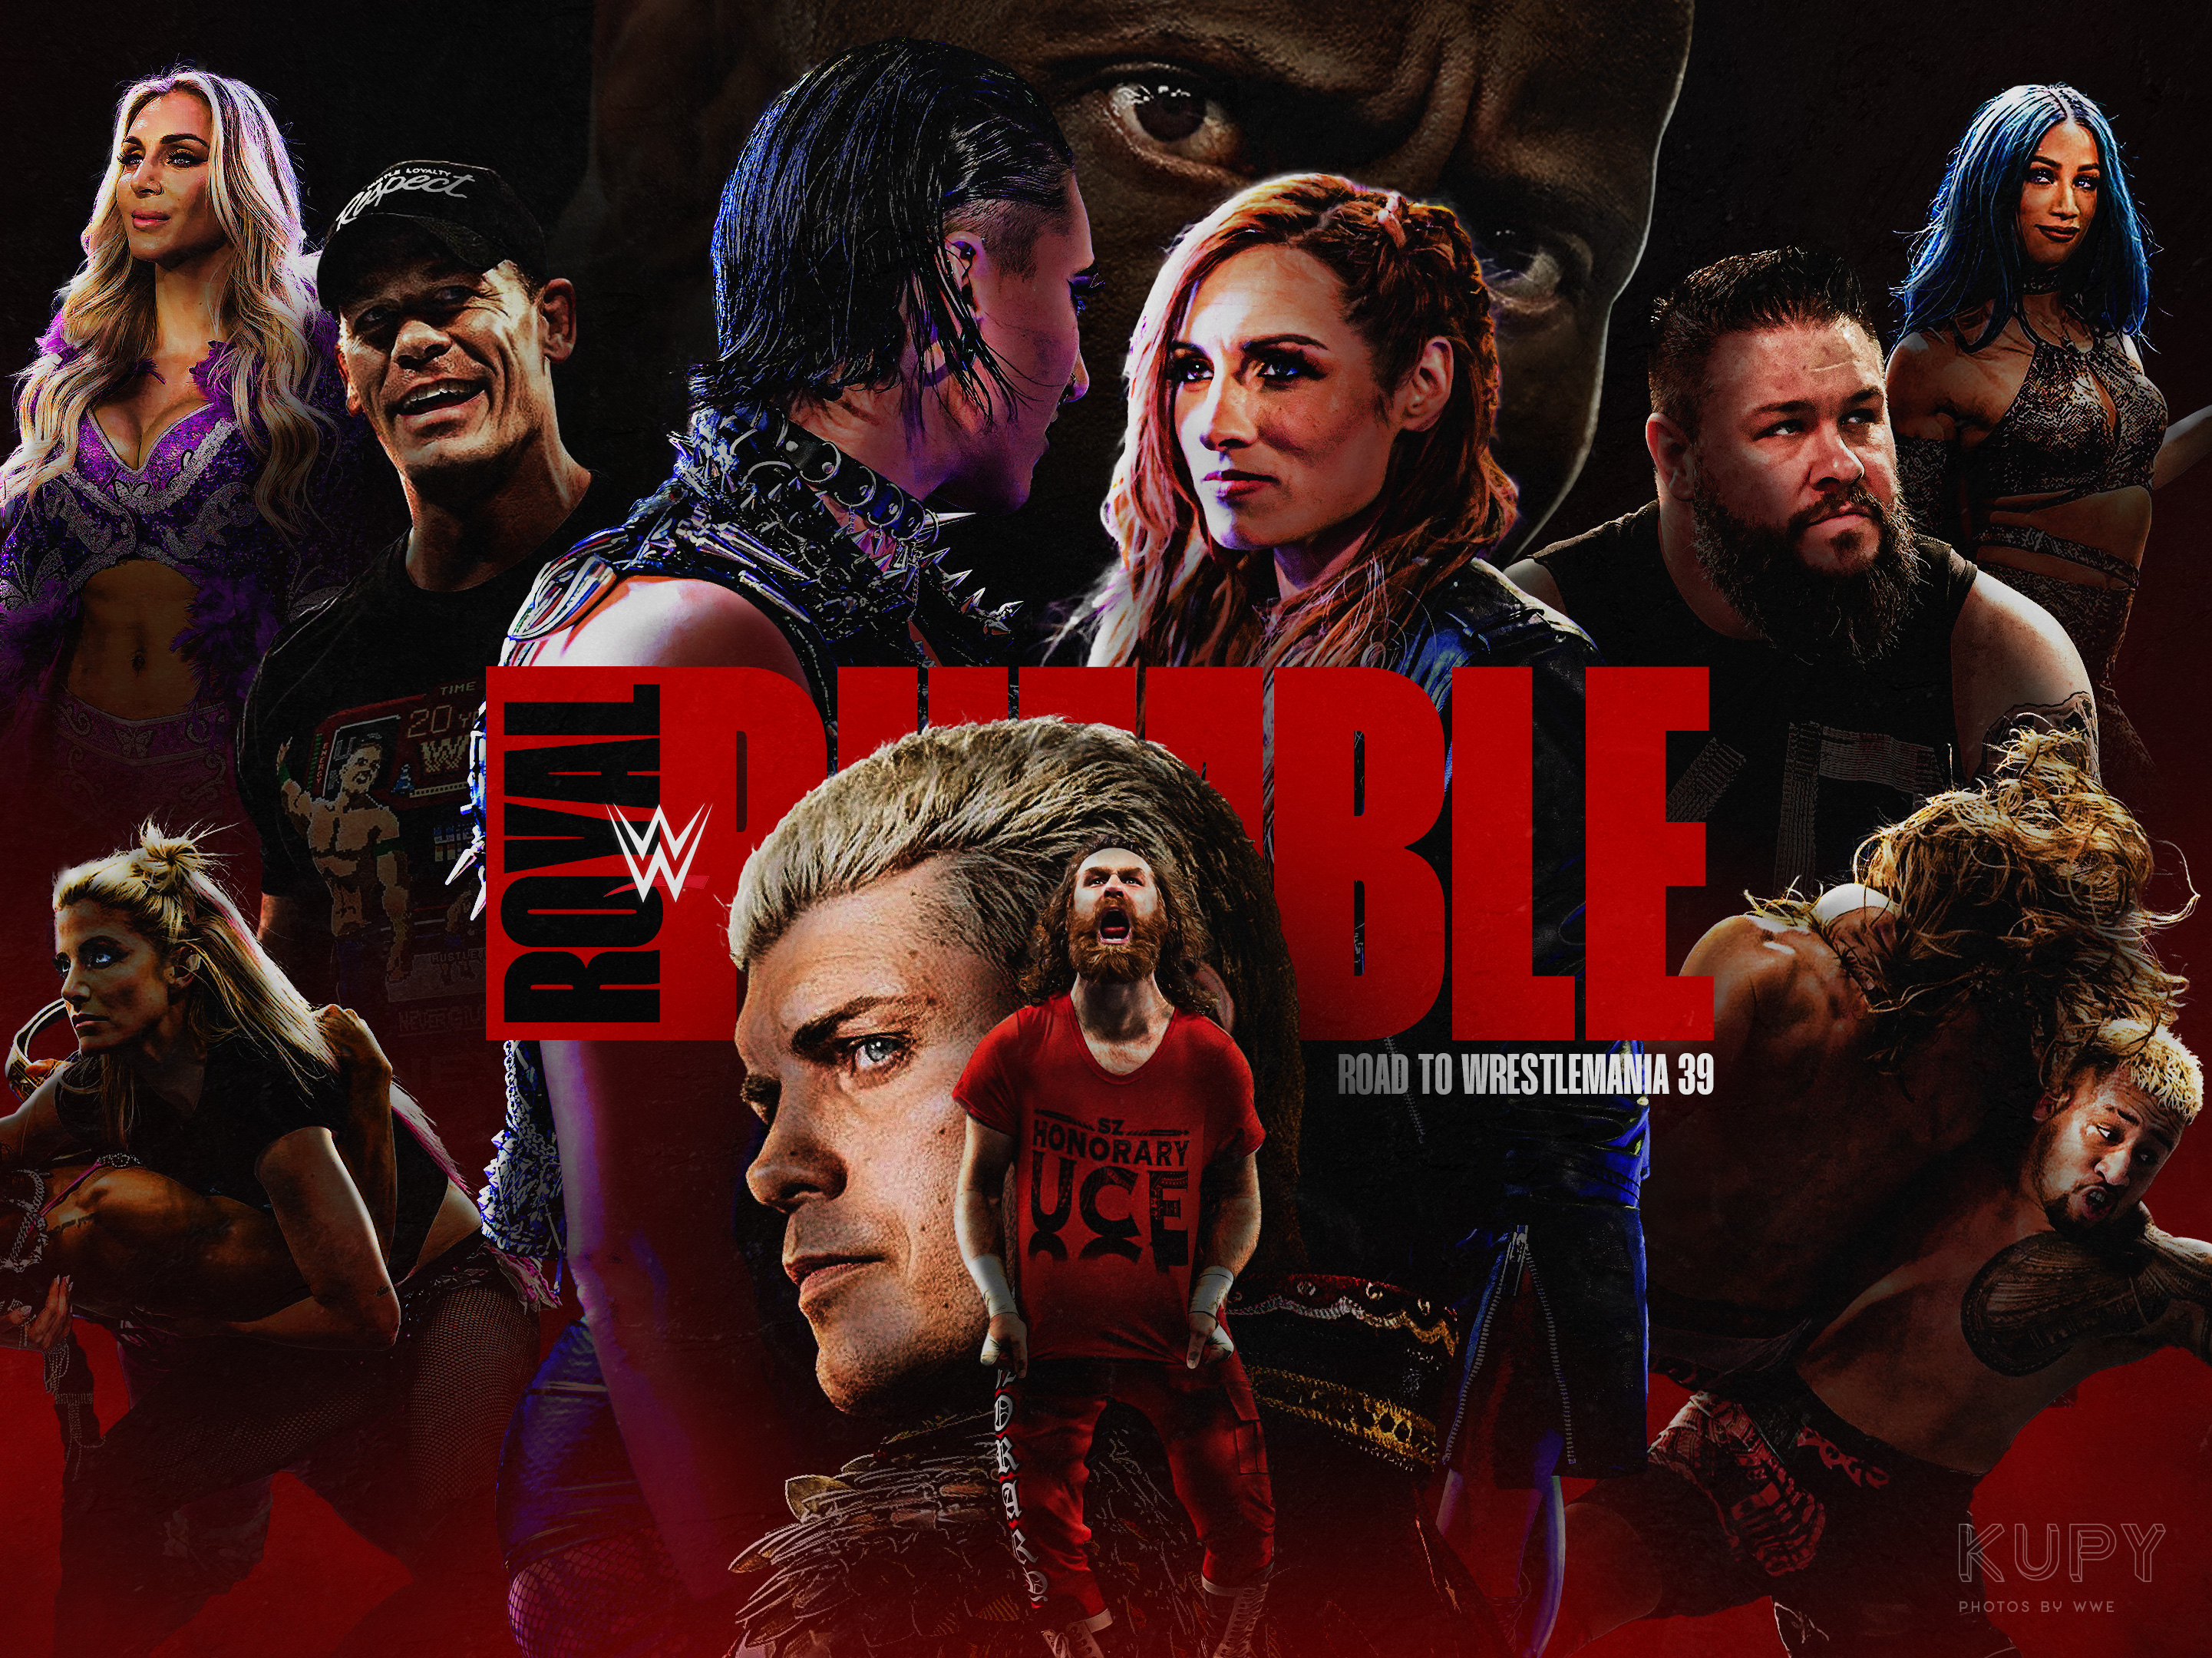 NEW Road to WrestleMania 39 – 2023 WWE Royal Rumble wallpaper! - Kupy  Wrestling Wallpapers